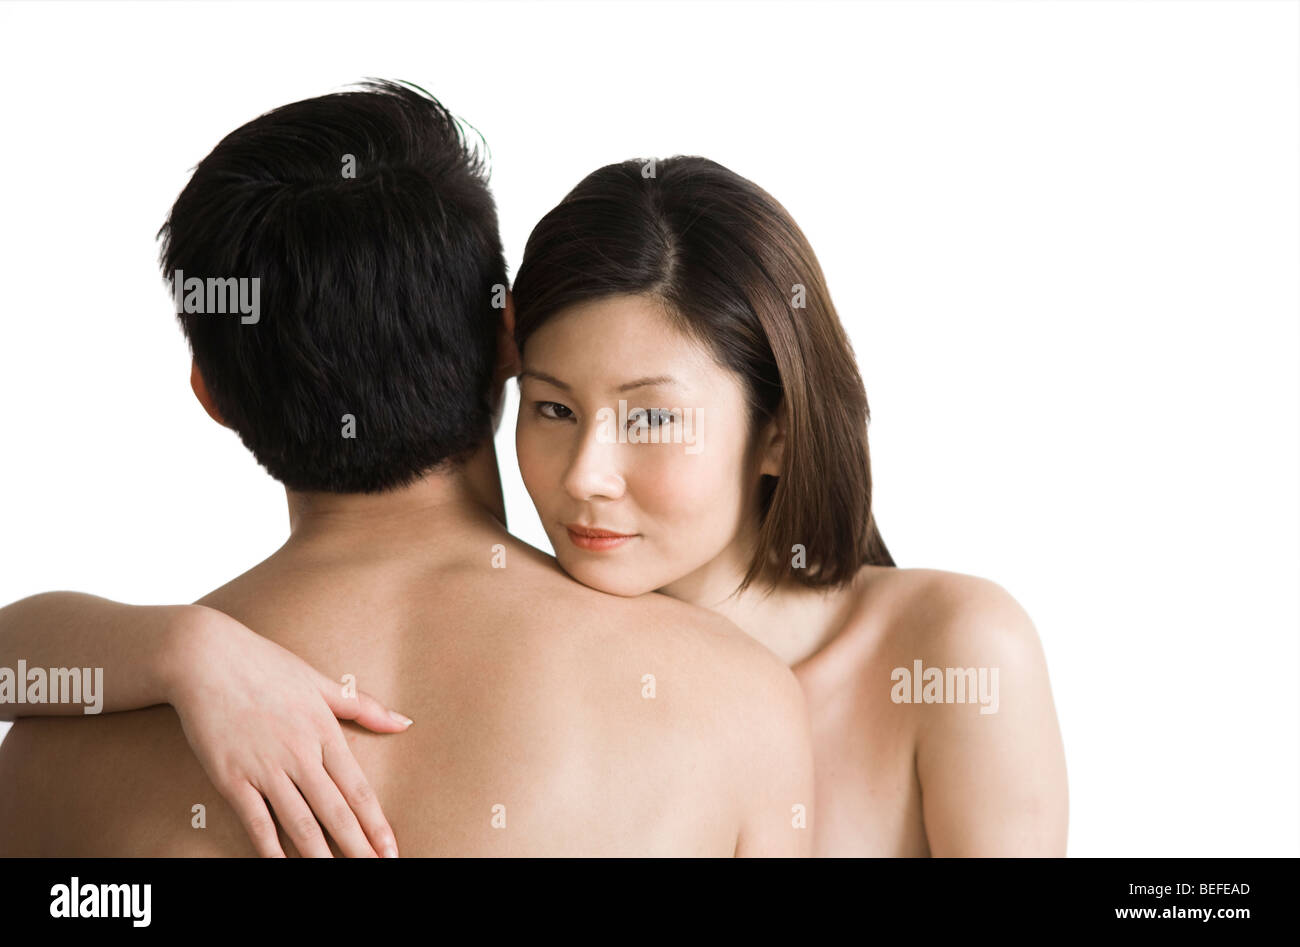 Woman holding man, man in rear view, portrait. Stock Photo